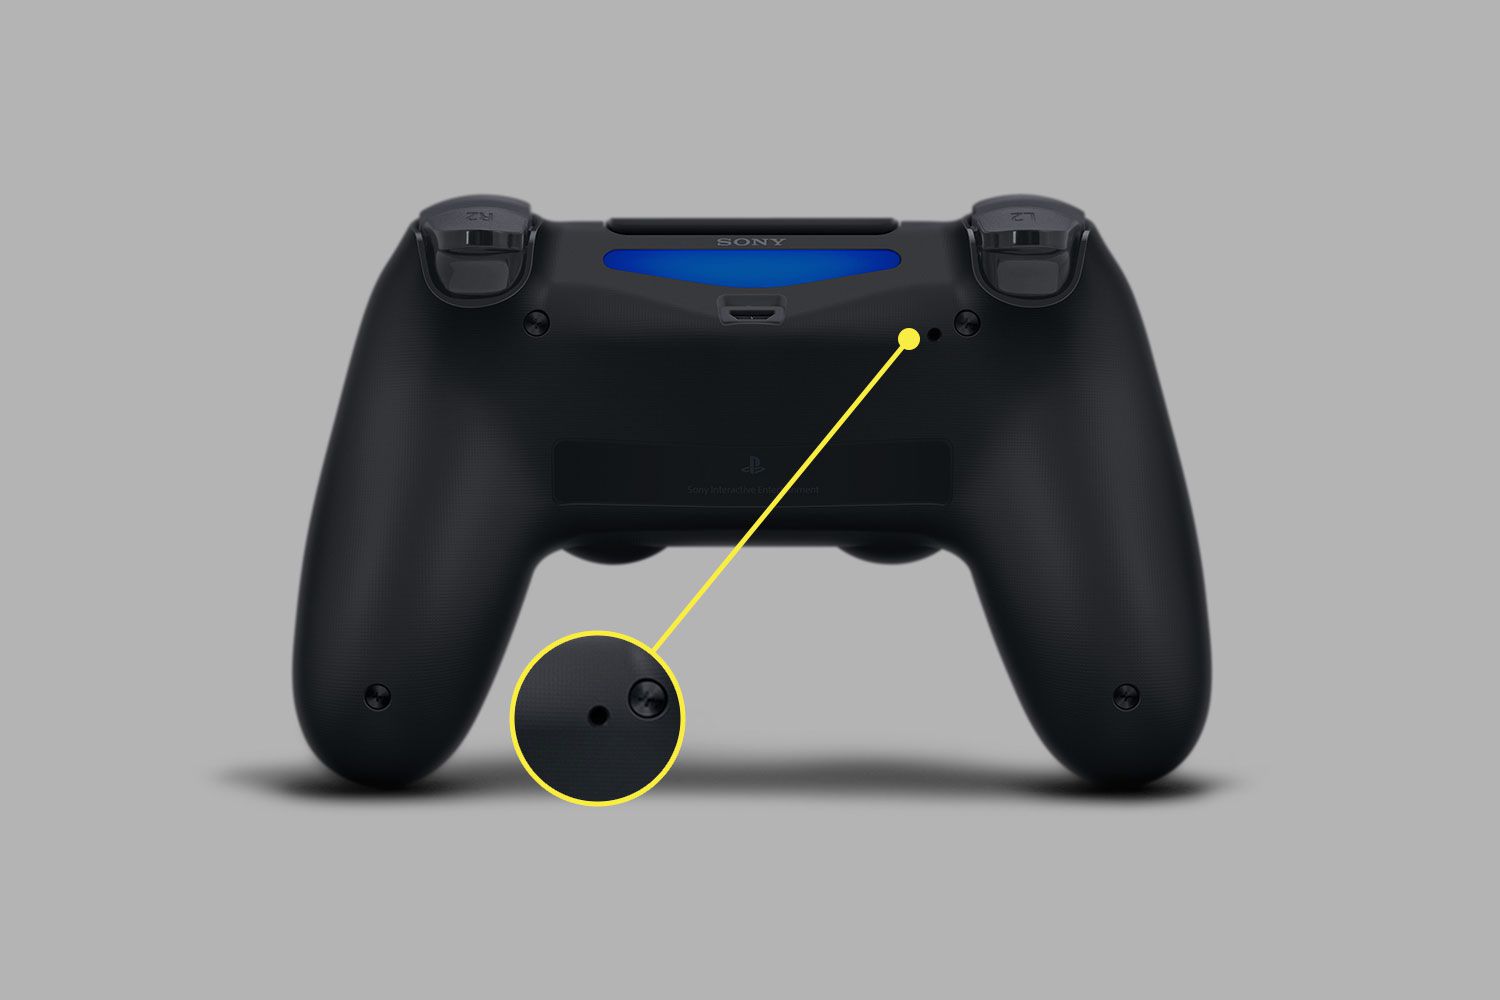 After releasing the reset button, the PS4 controller will reset and turn off.
Wait for a few seconds to ensure the reset process is complete.